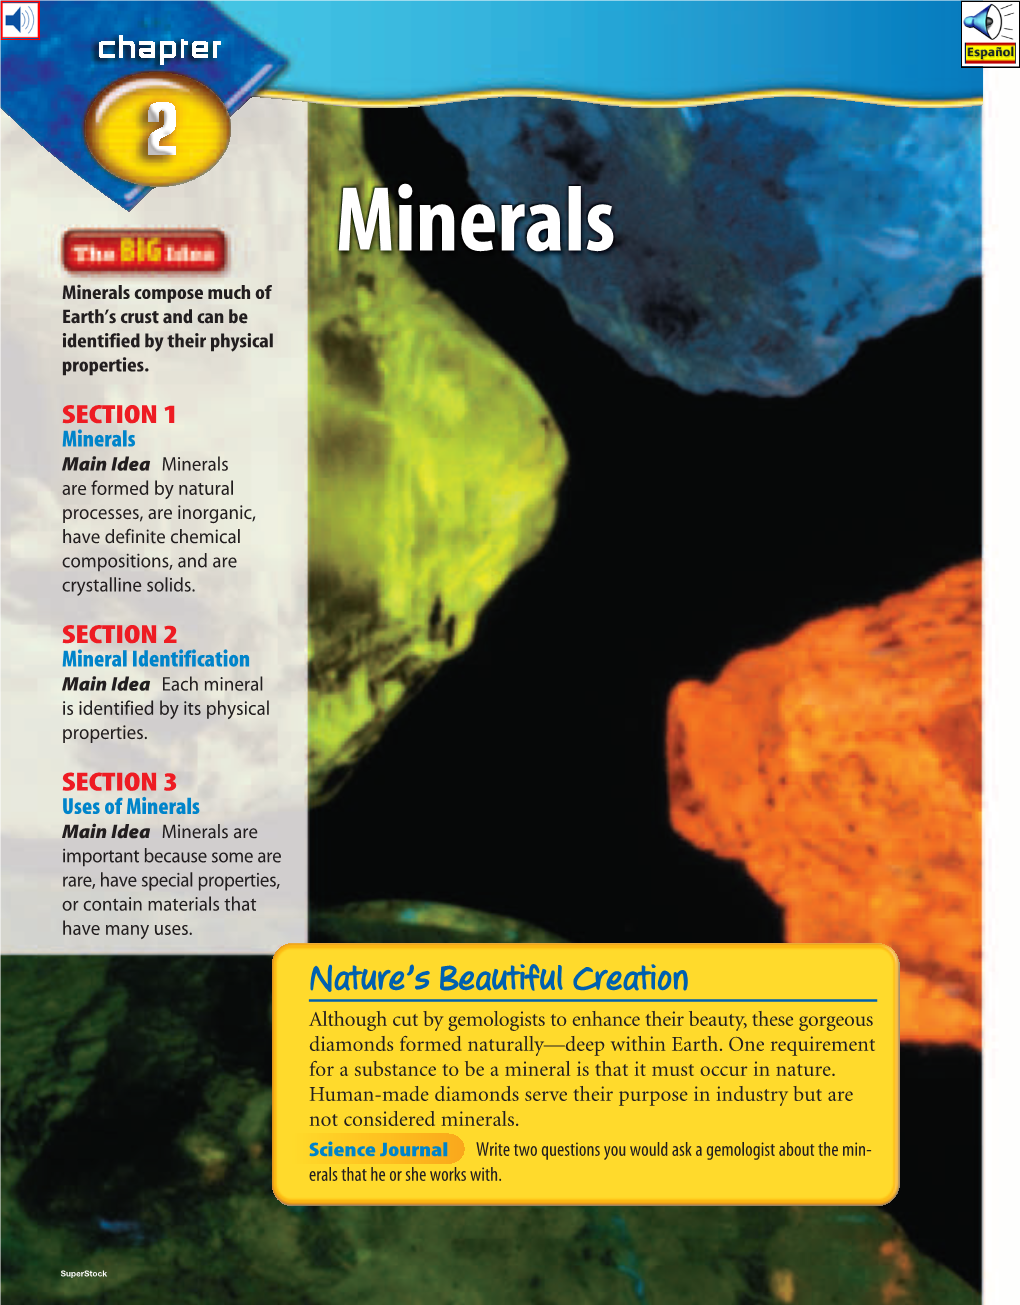 Minerals Minerals Compose Much of Earth’S Crust and Can Be Identified by Their Physical Properties